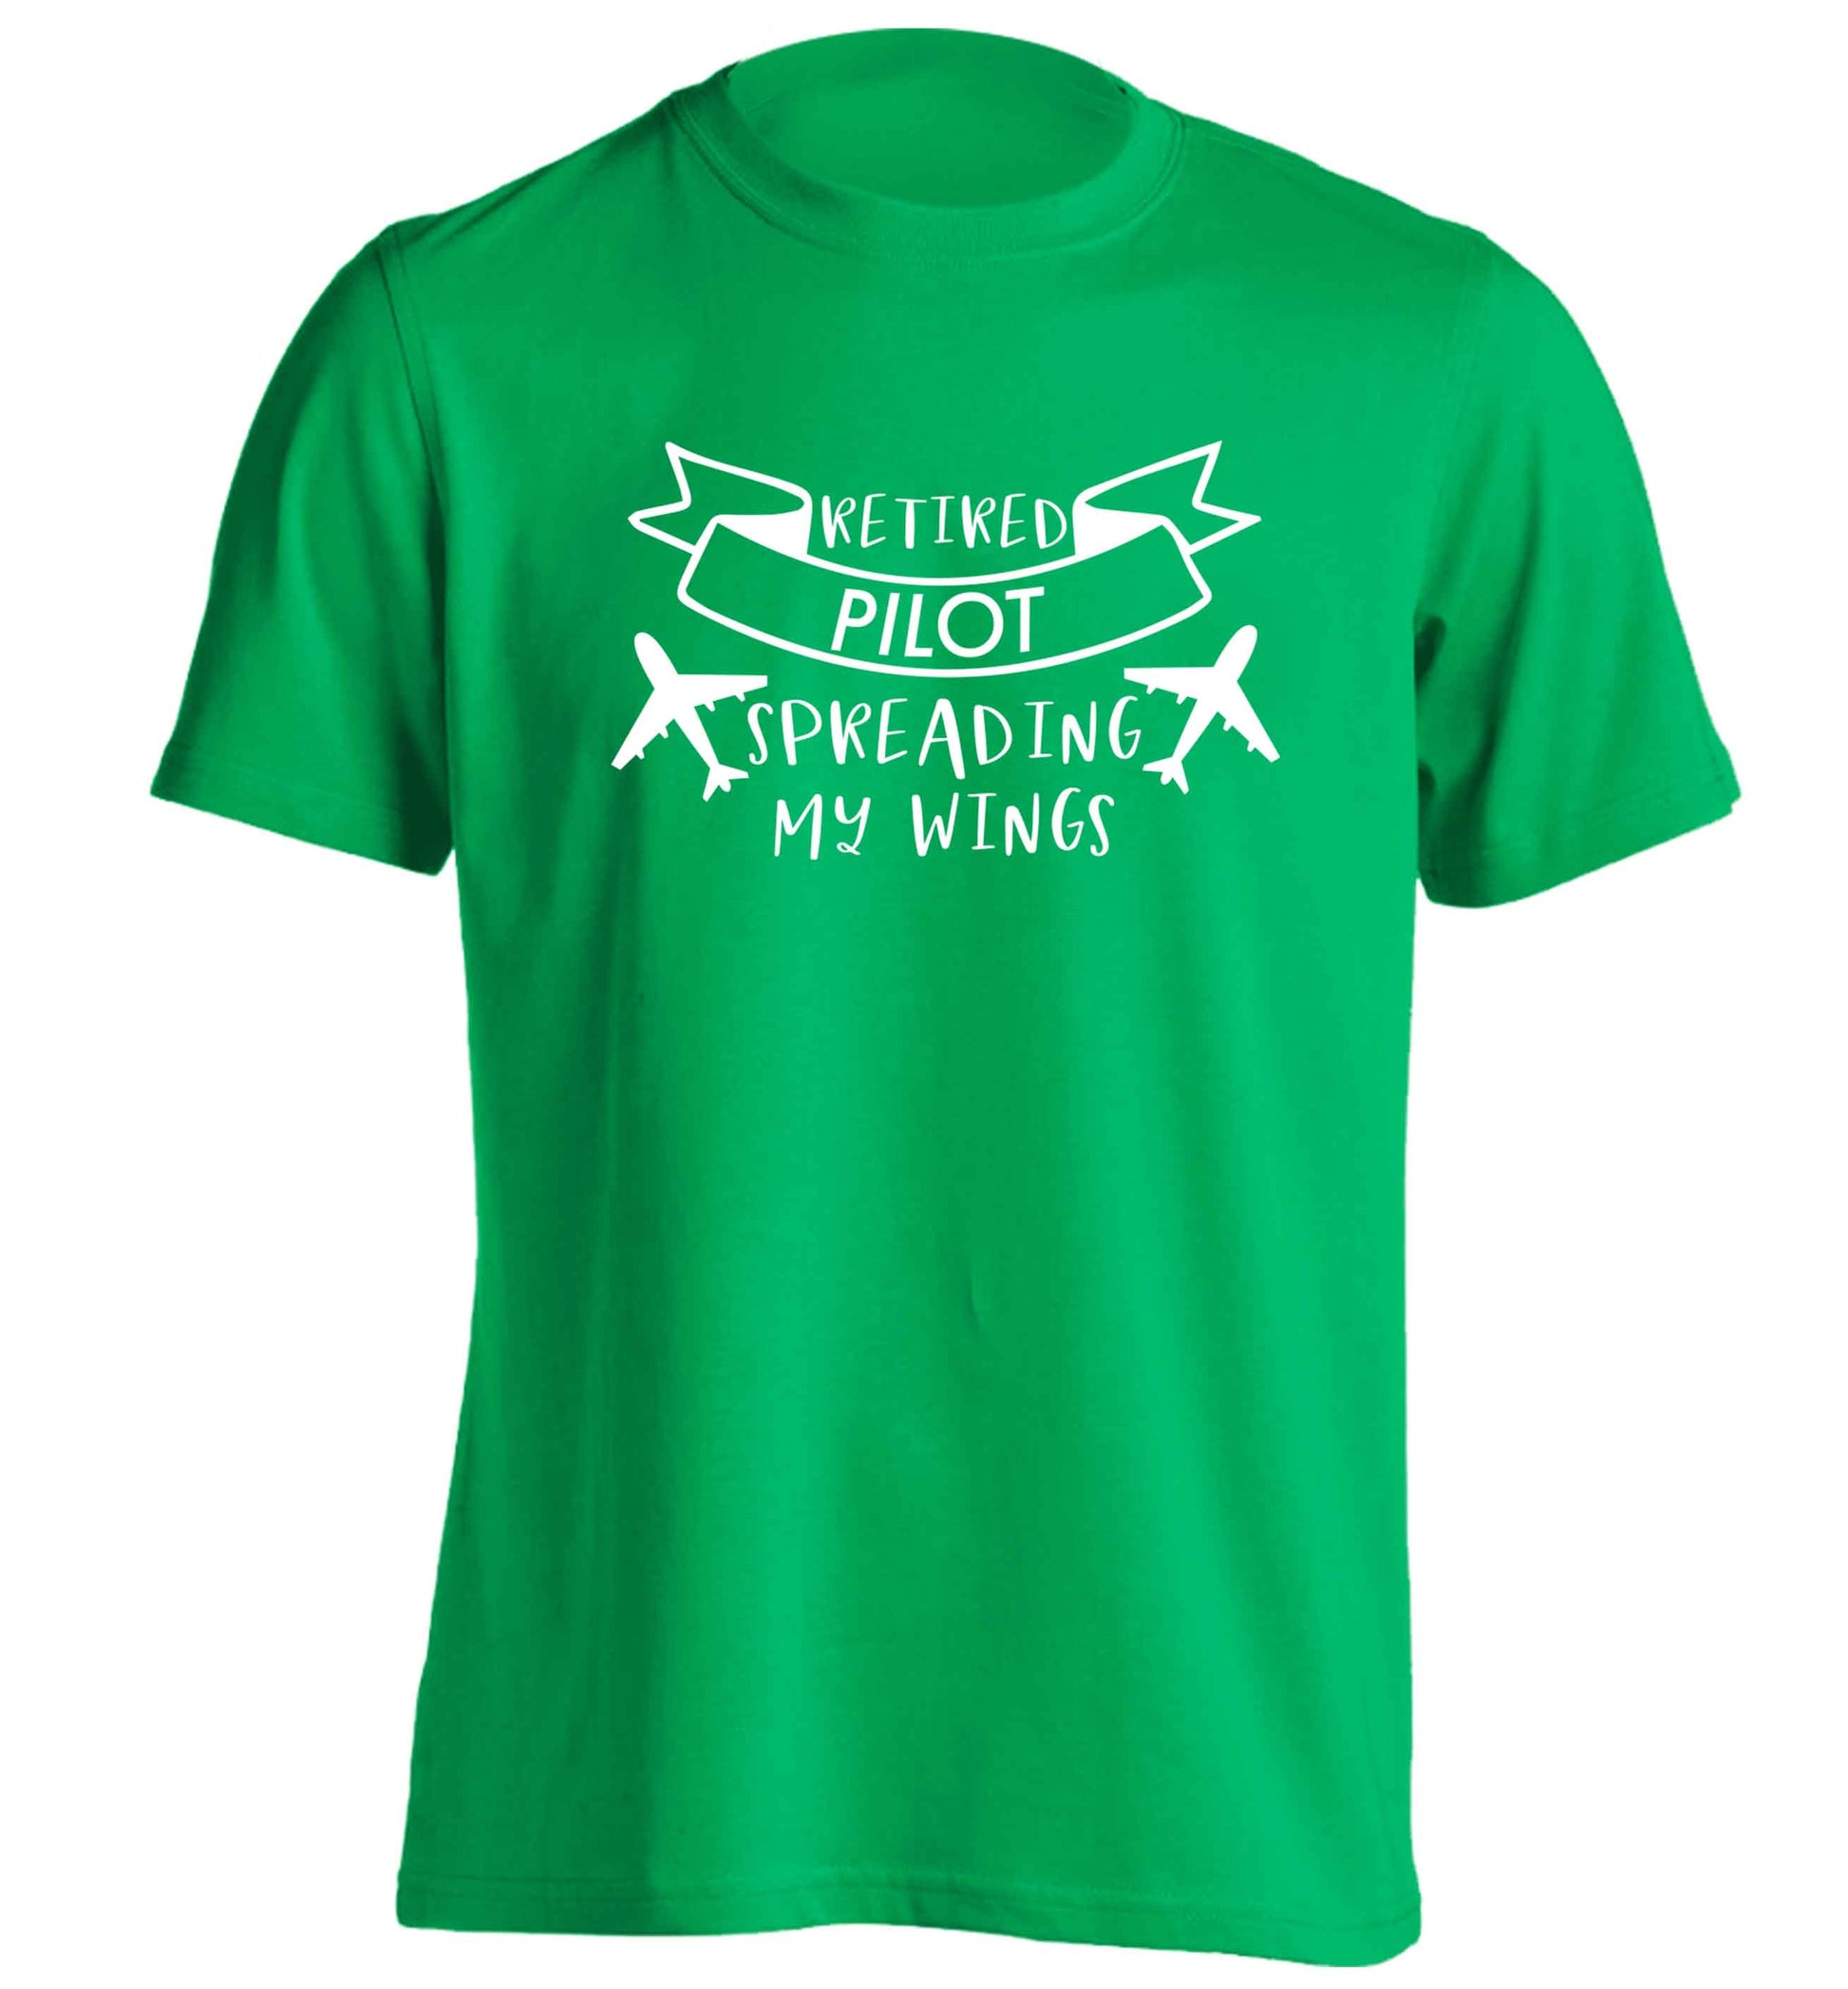 Retired pilot spreading my wings adults unisex green Tshirt 2XL